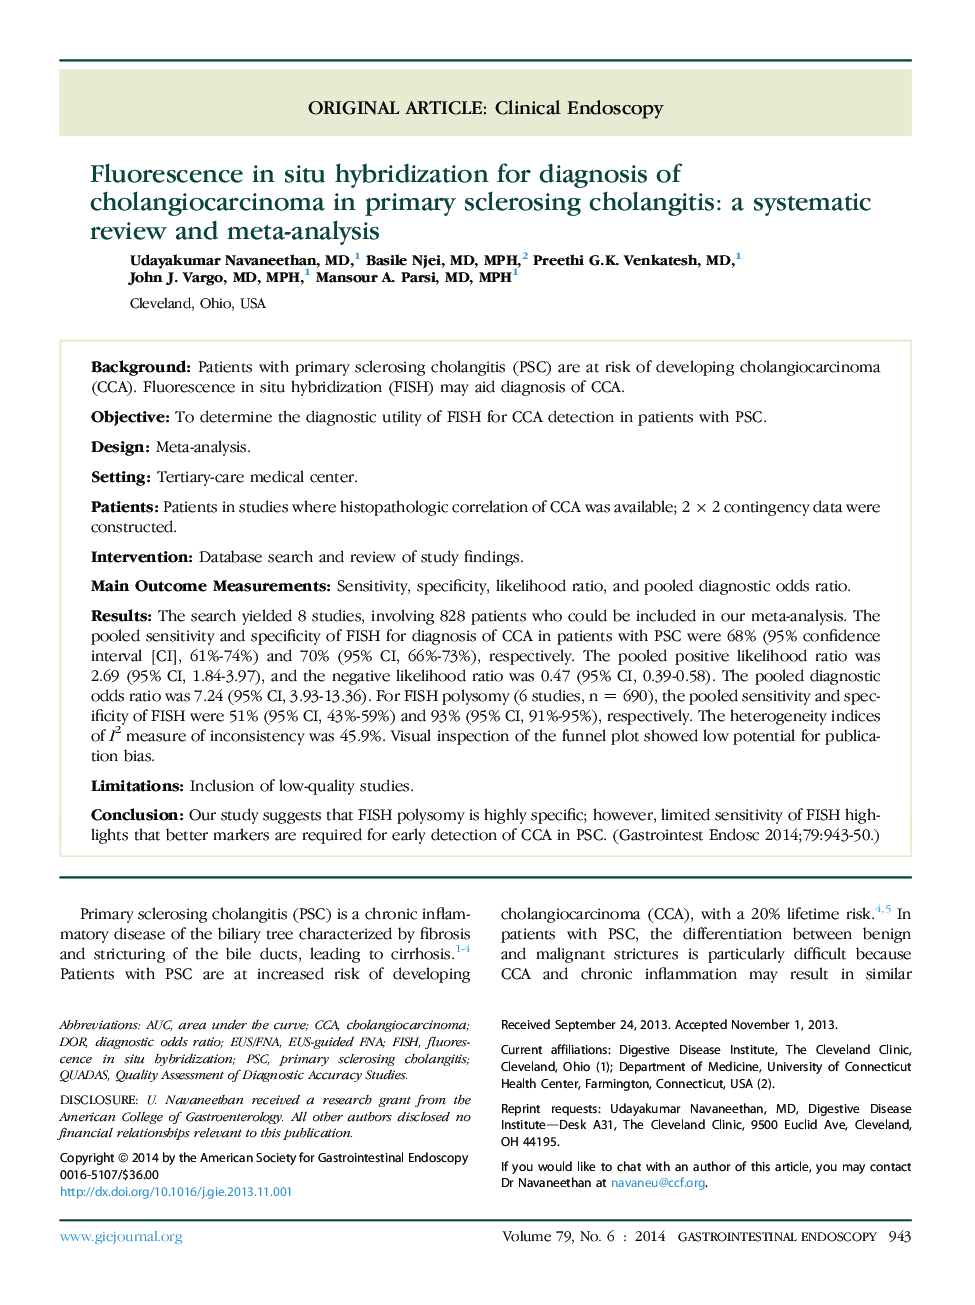 Fluorescence in situ hybridization for diagnosis of cholangiocarcinoma in primary sclerosing cholangitis: a systematic review and meta-analysis